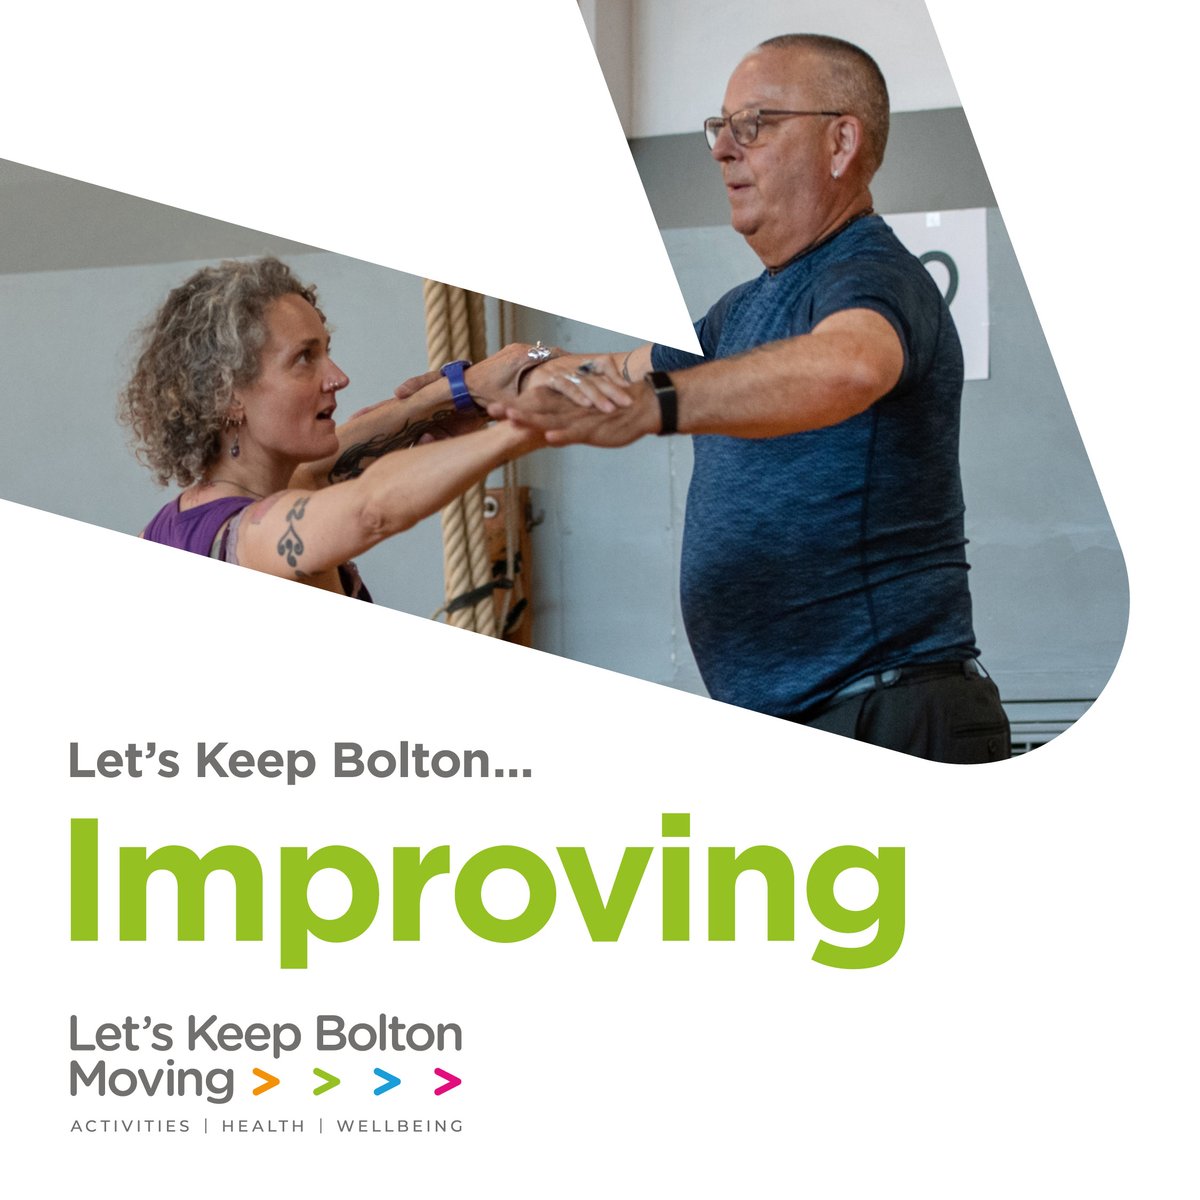 Move more, every day. Feel healthier and happier! No matter how much you do, physical activity is good for your body and mind. Adults should aim to be active every day. Some is good - more is better still ▶️🚶 Visit letskeepboltonmoving.co.uk for more details. #KeepBoltonMoving